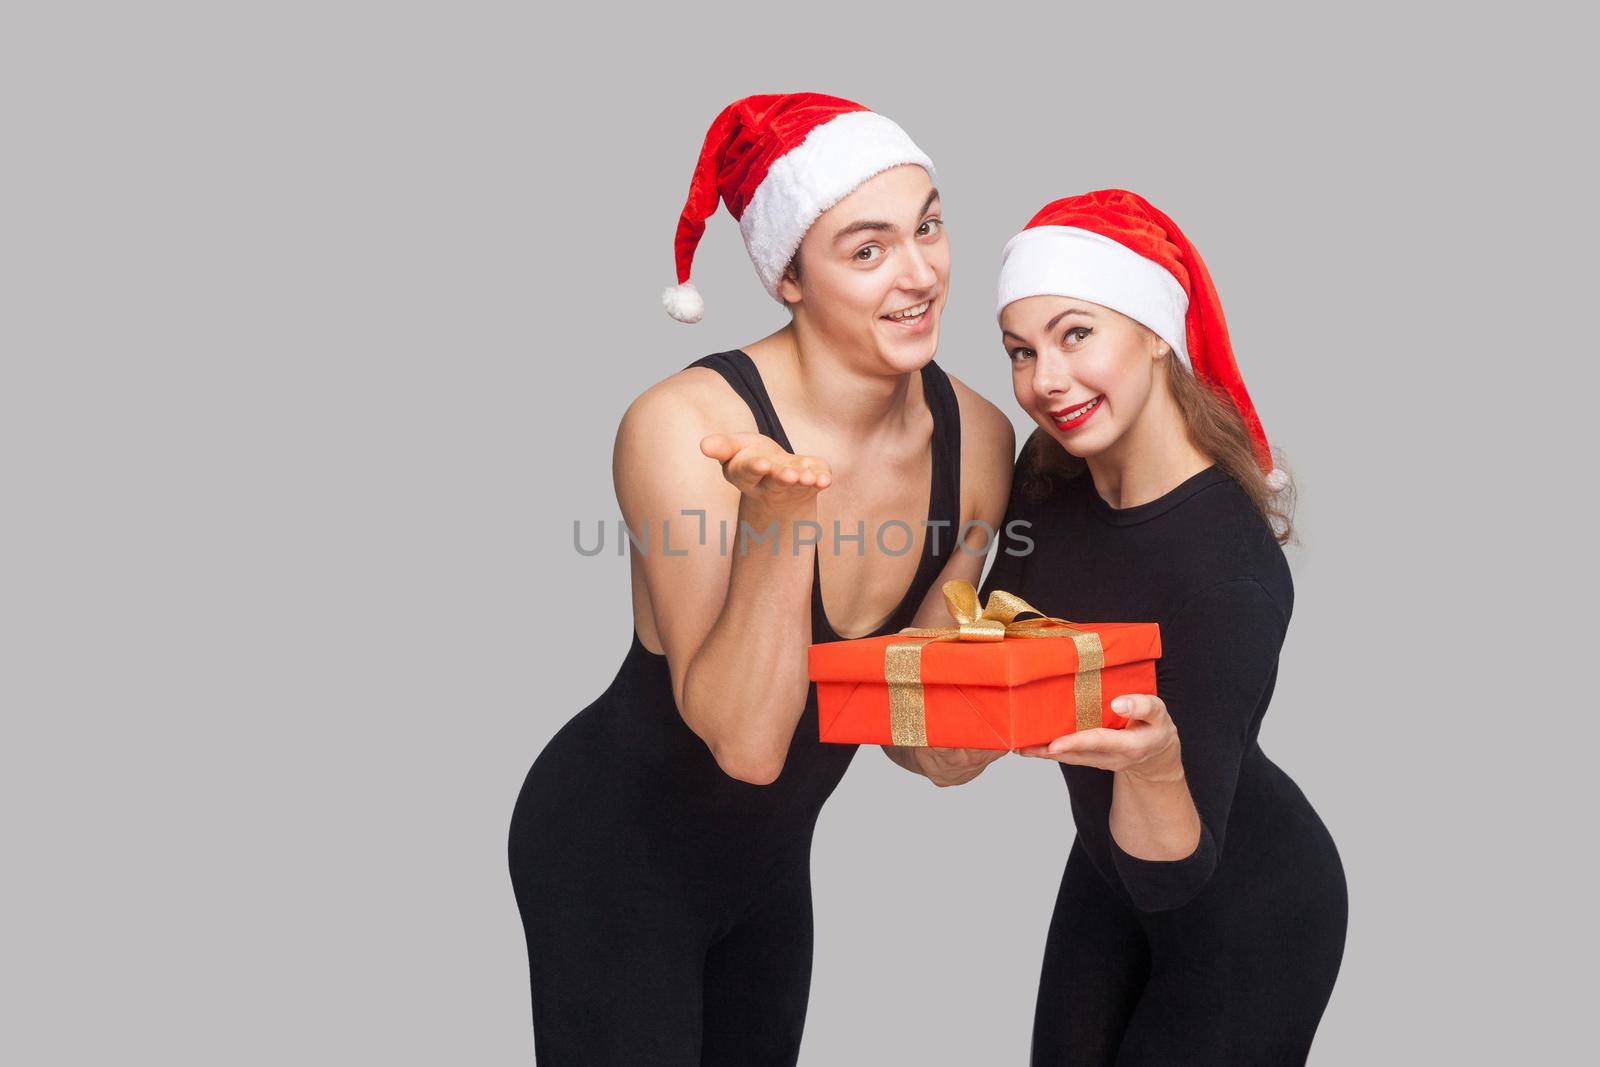 It's gift box for you! couple in christmas hat standing and sharing gift box and looking at camera. Indoor, studio shot, isolated on gray background